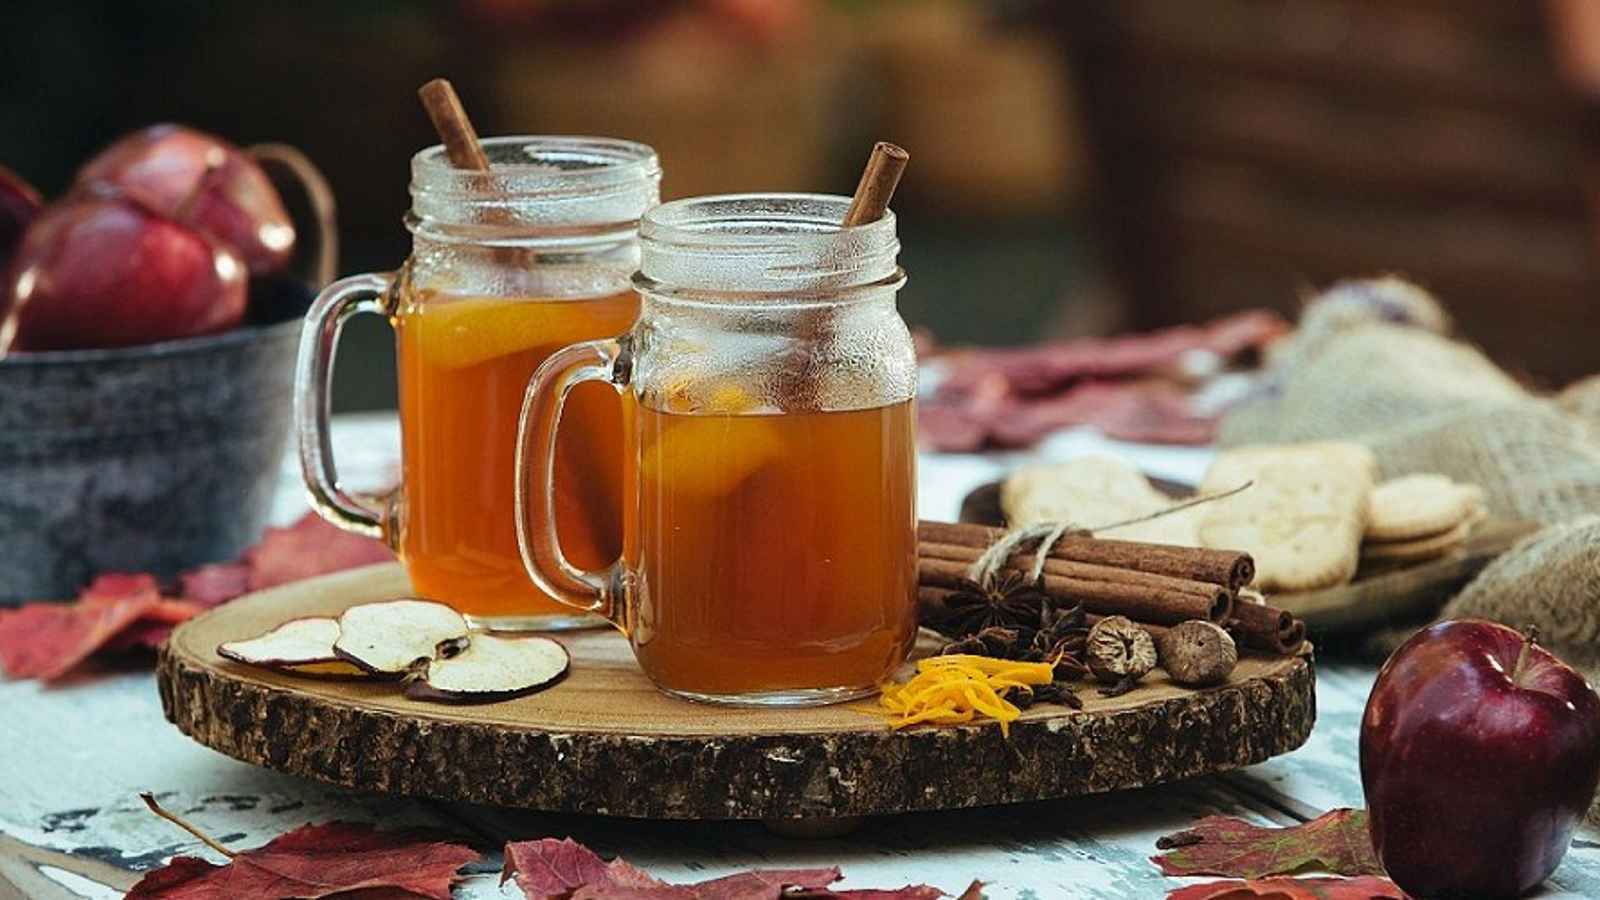 National Hot Mulled Cider Day 2023: Date, History, Facts about Ideal Mulled Cider Recipe